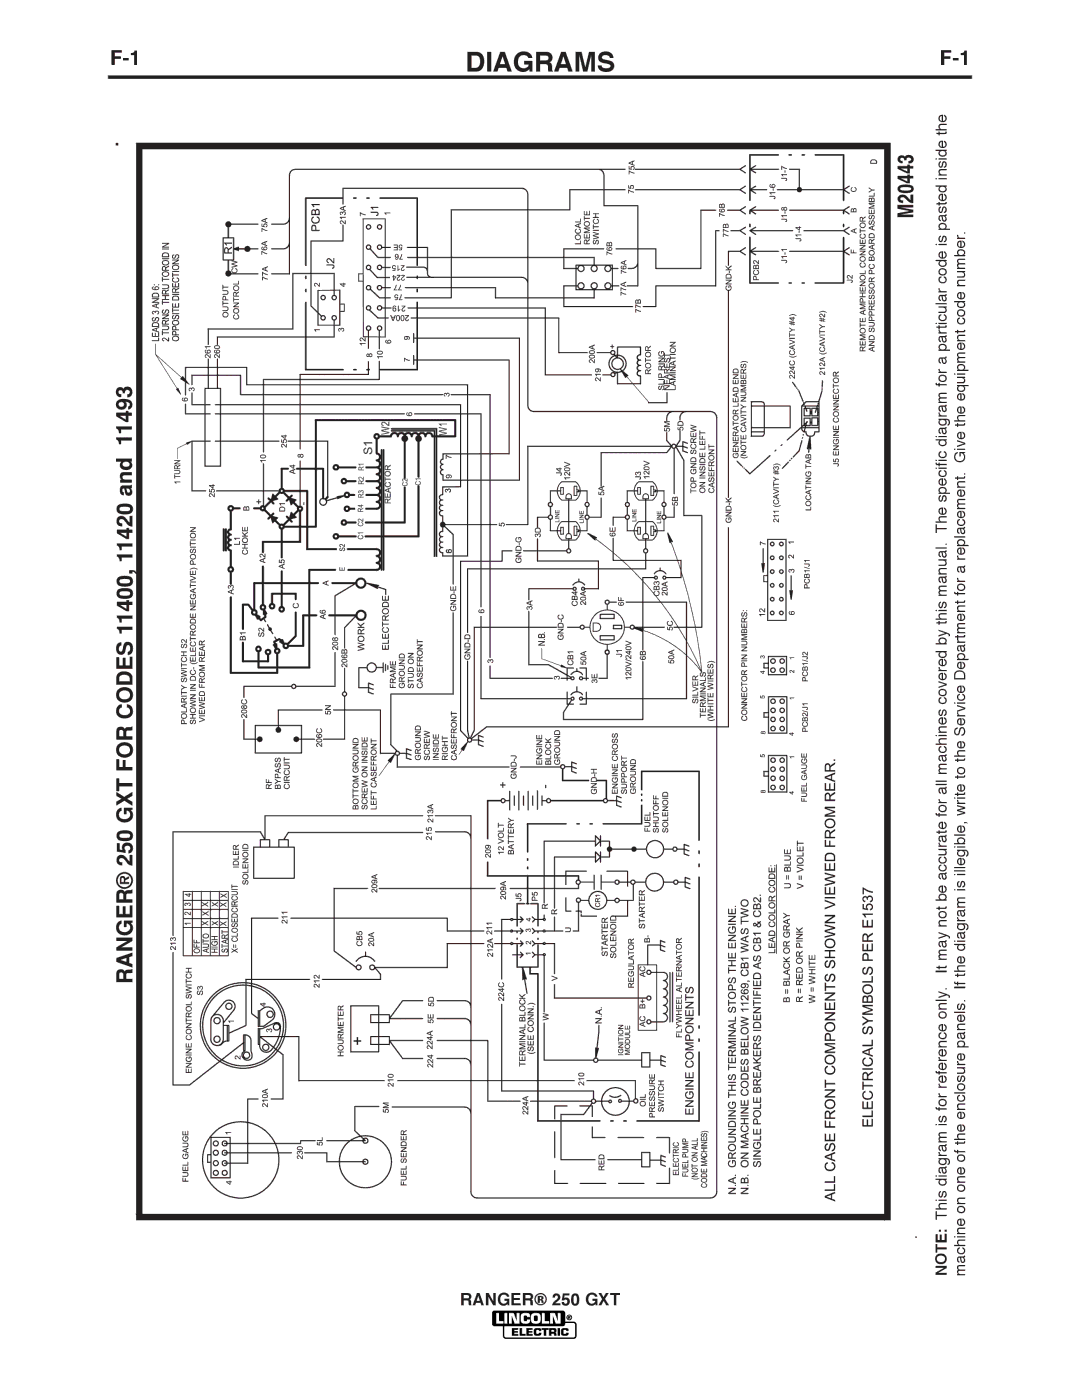 Lincoln Electric 250 GXT manual Diagrams 